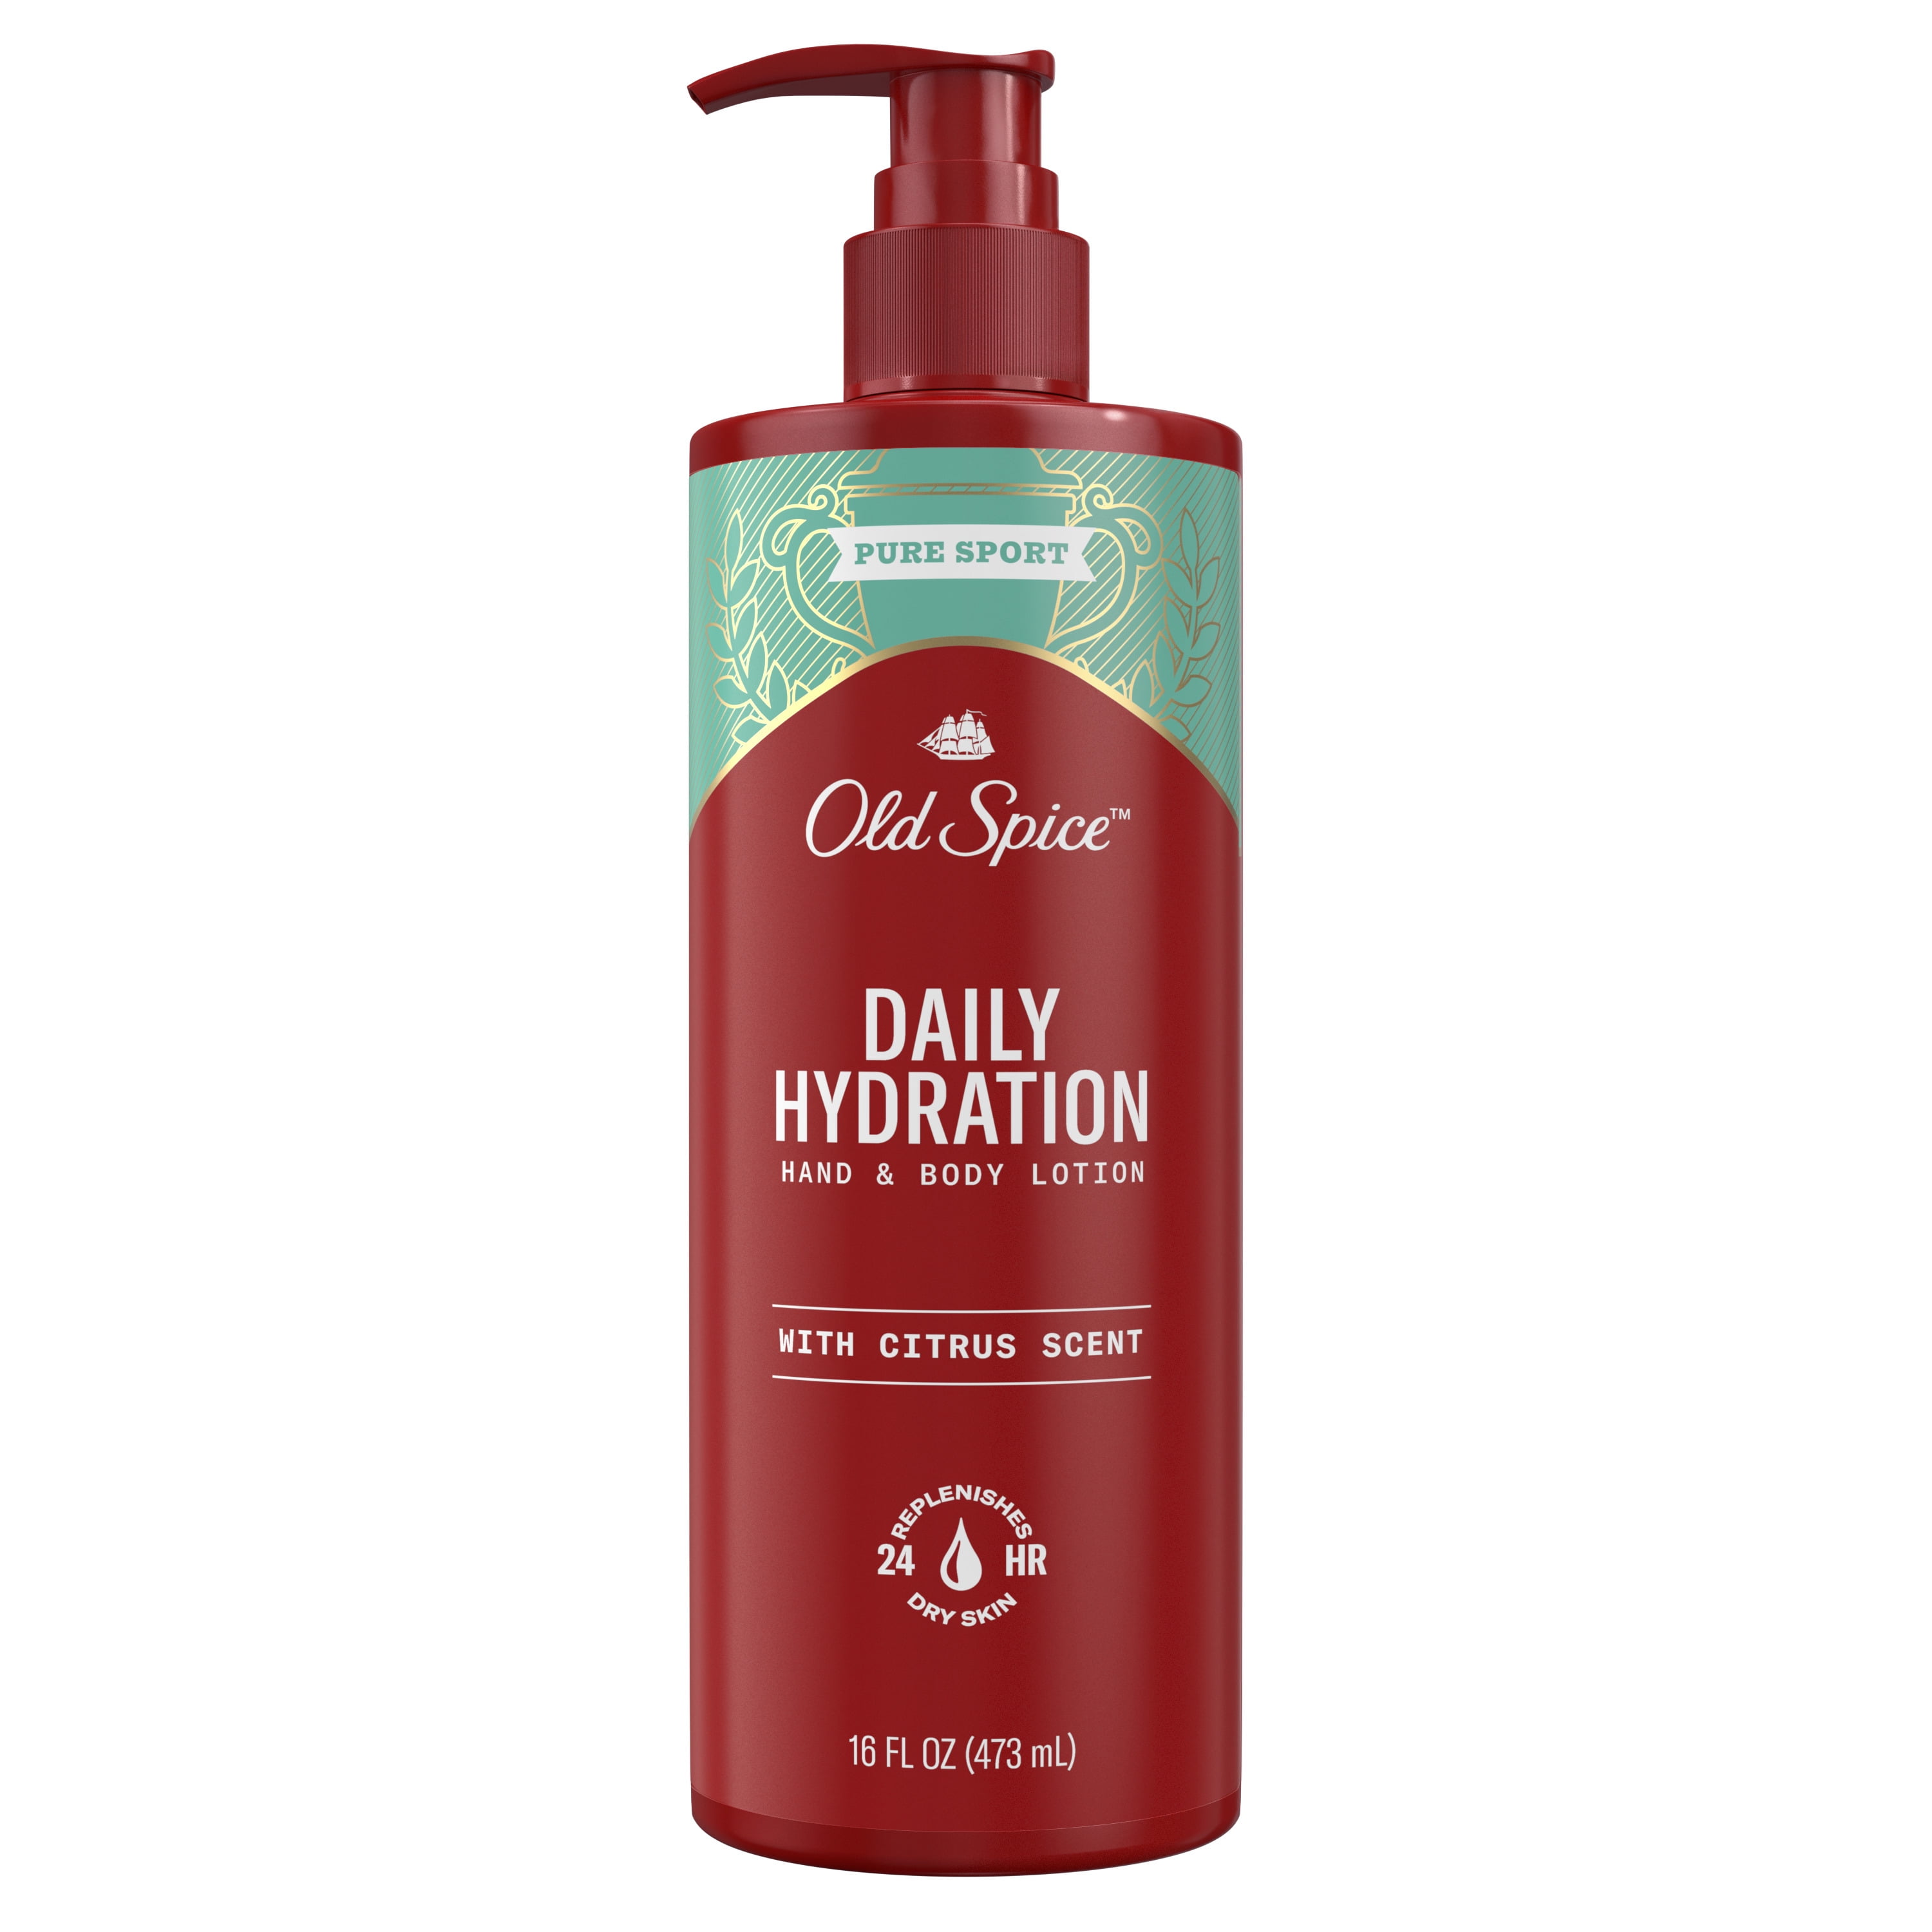 Old Spice Daily Hydration Hand & Body Lotion for Men, Pure Sport with Citrus Scent, 16.0 fl oz